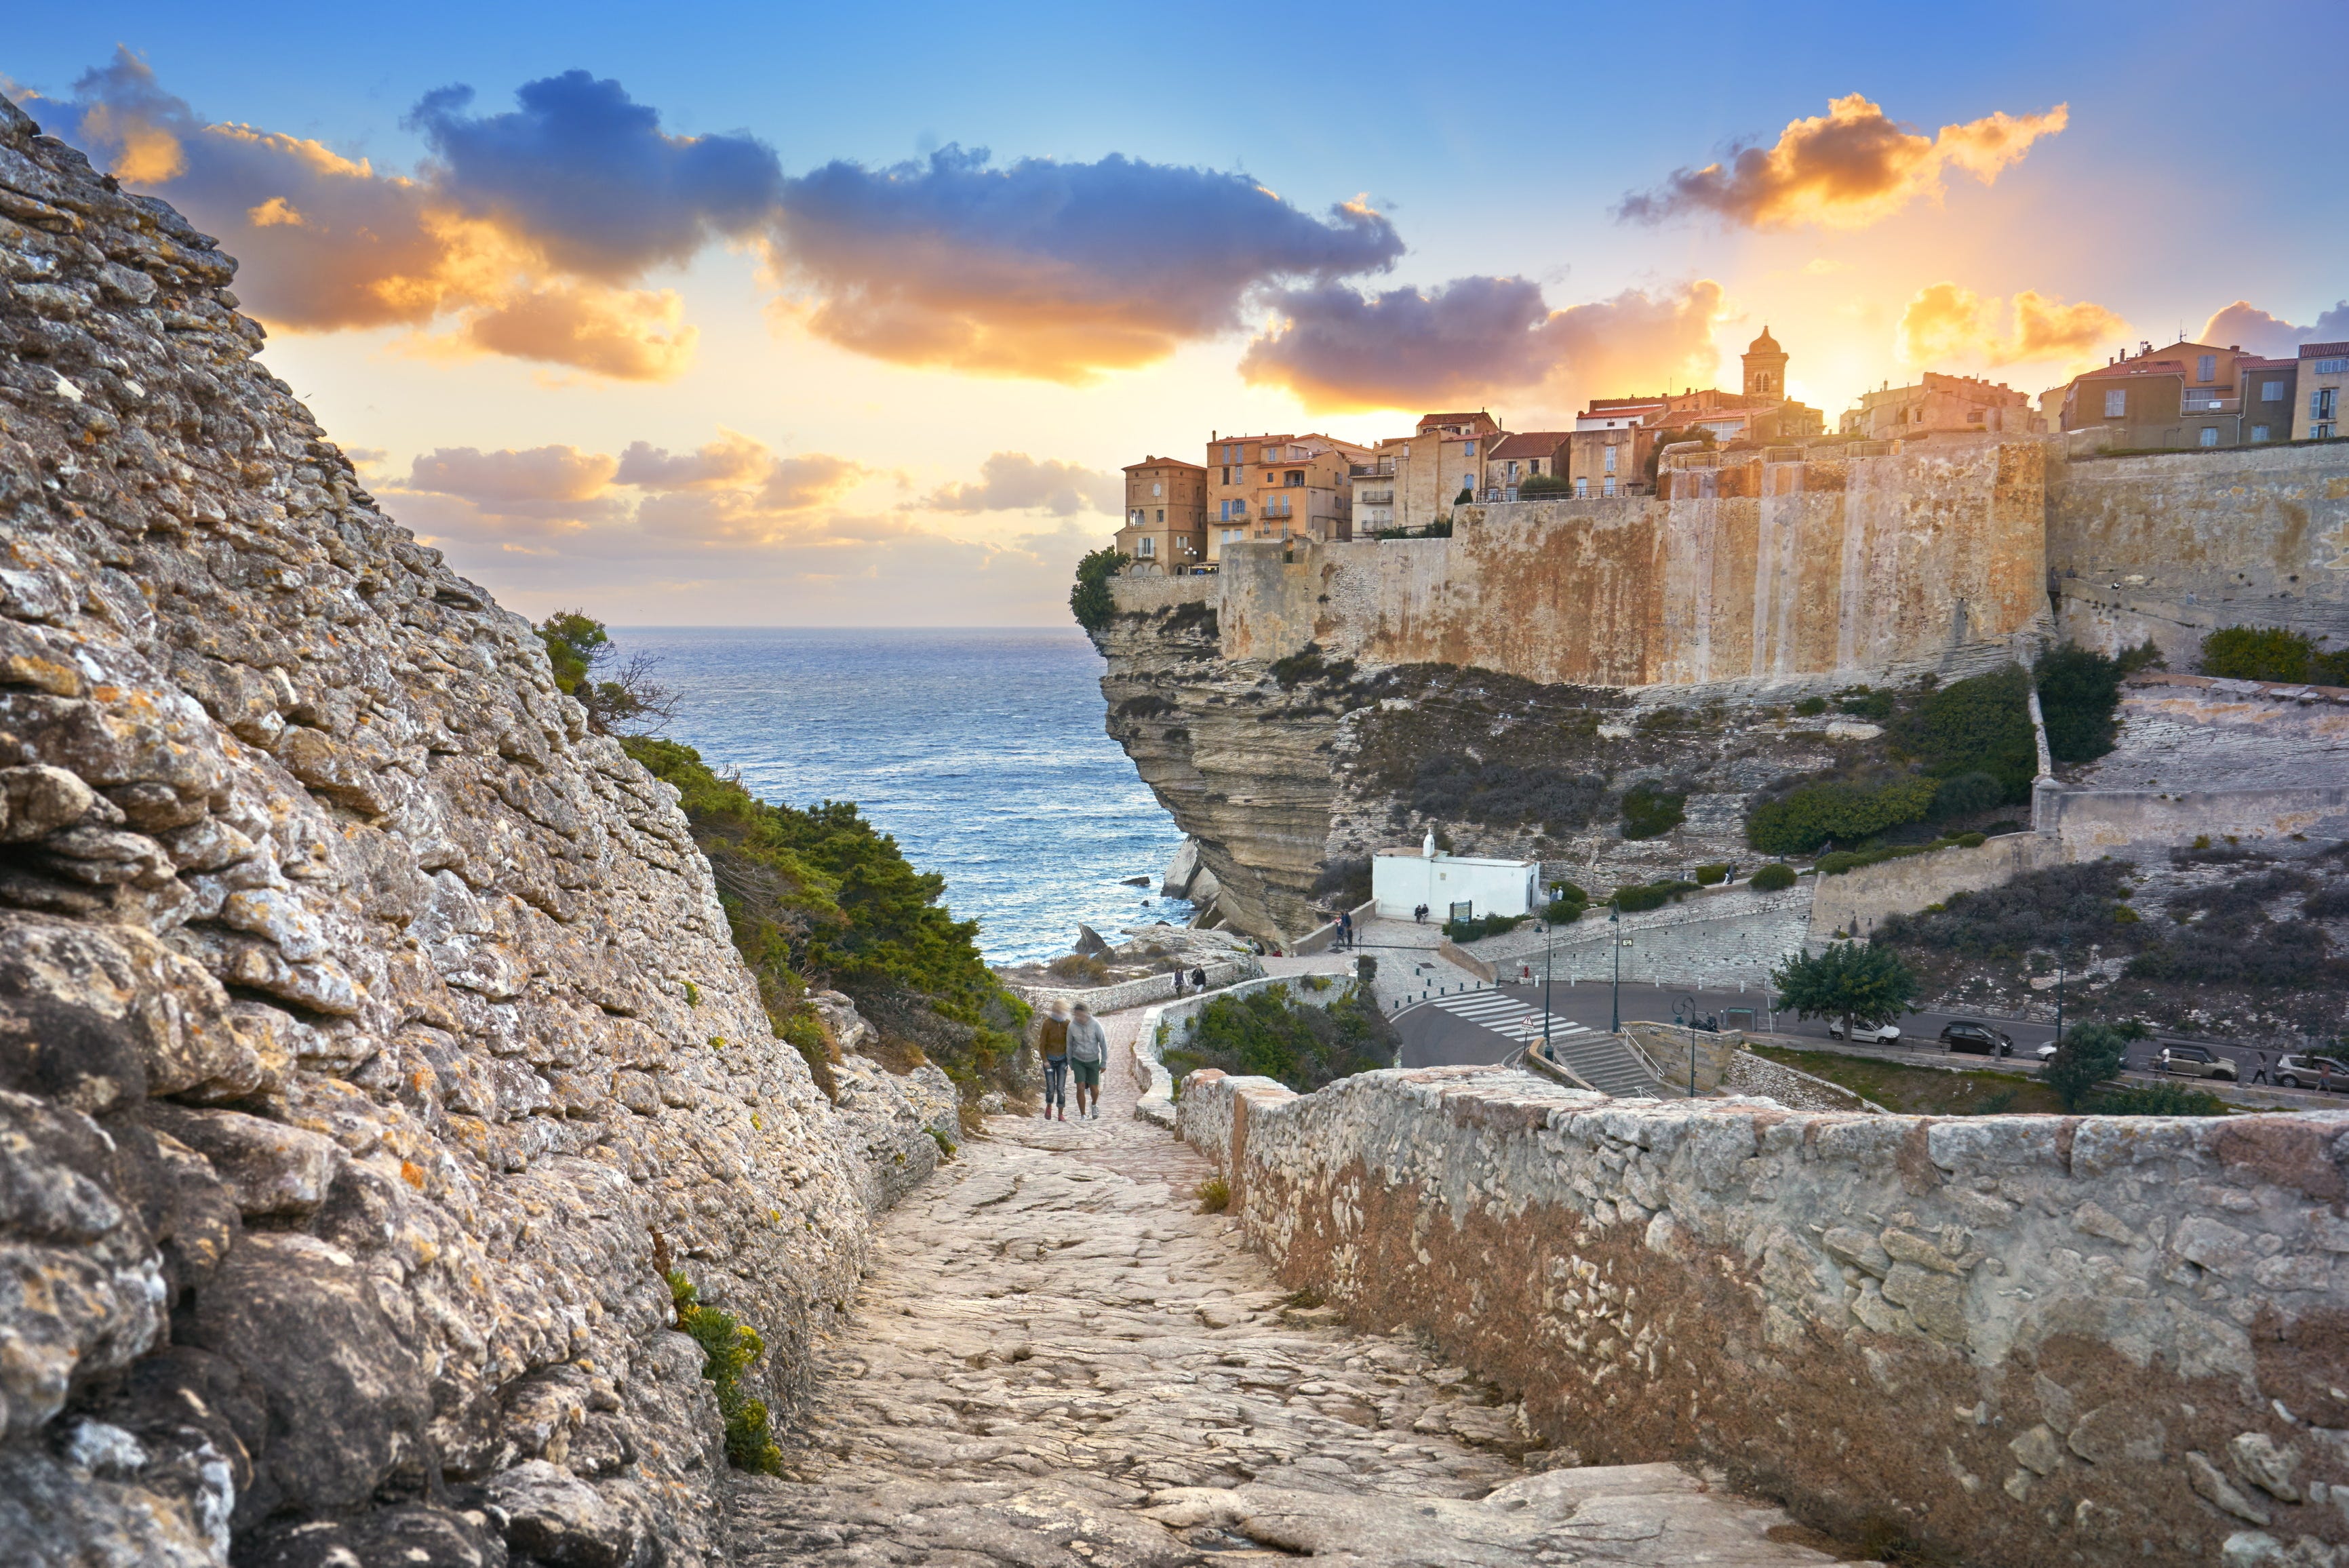 <p>According to Intrepid Travel, the Mediterranean island of Corsica is a good alternative to Positano, a cliffside village on the Amalfi Coast in Italy.</p><p>"Unlike the bustling and tourist-heavy atmosphere of Positano, Corsica offers a more tranquil and peaceful environment, allowing travelers to unwind and immerse themselves in the island's serene and calming ambiance," the company said.</p><p>In Corsica, "travelers can enjoy a more authentic, tranquil, and immersive experience, exploring the island's natural beauty, rich cultural heritage, and diverse activities without the overwhelming crowds typically found in more popular tourist destinations," the company added.</p>